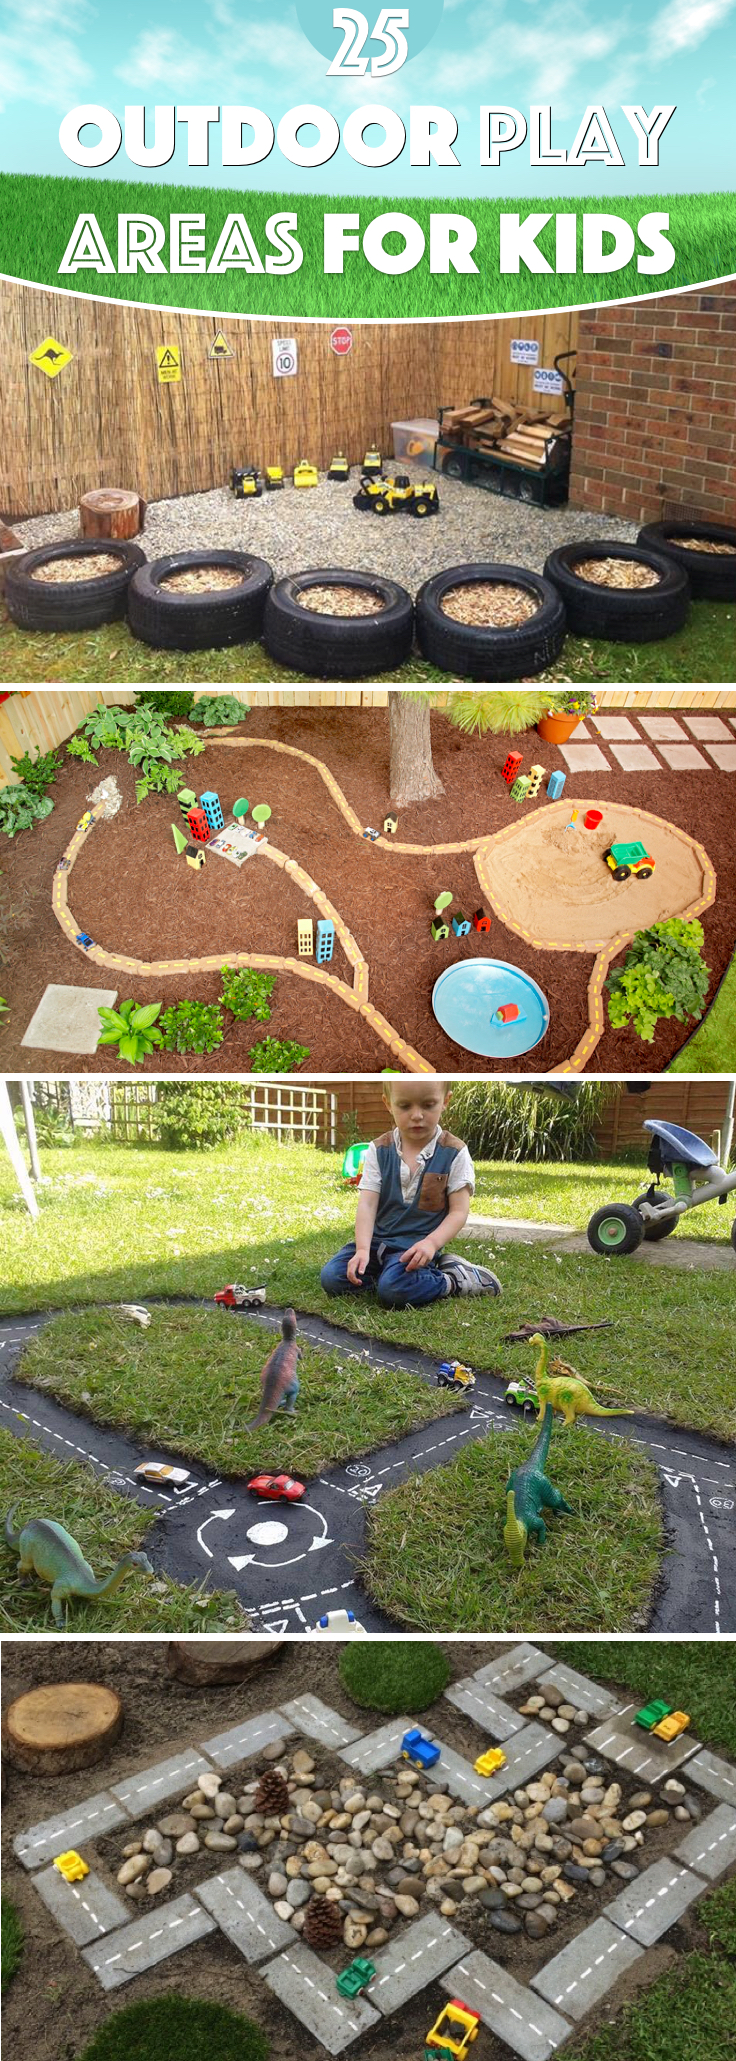 Outdoor Play Areas For Kids